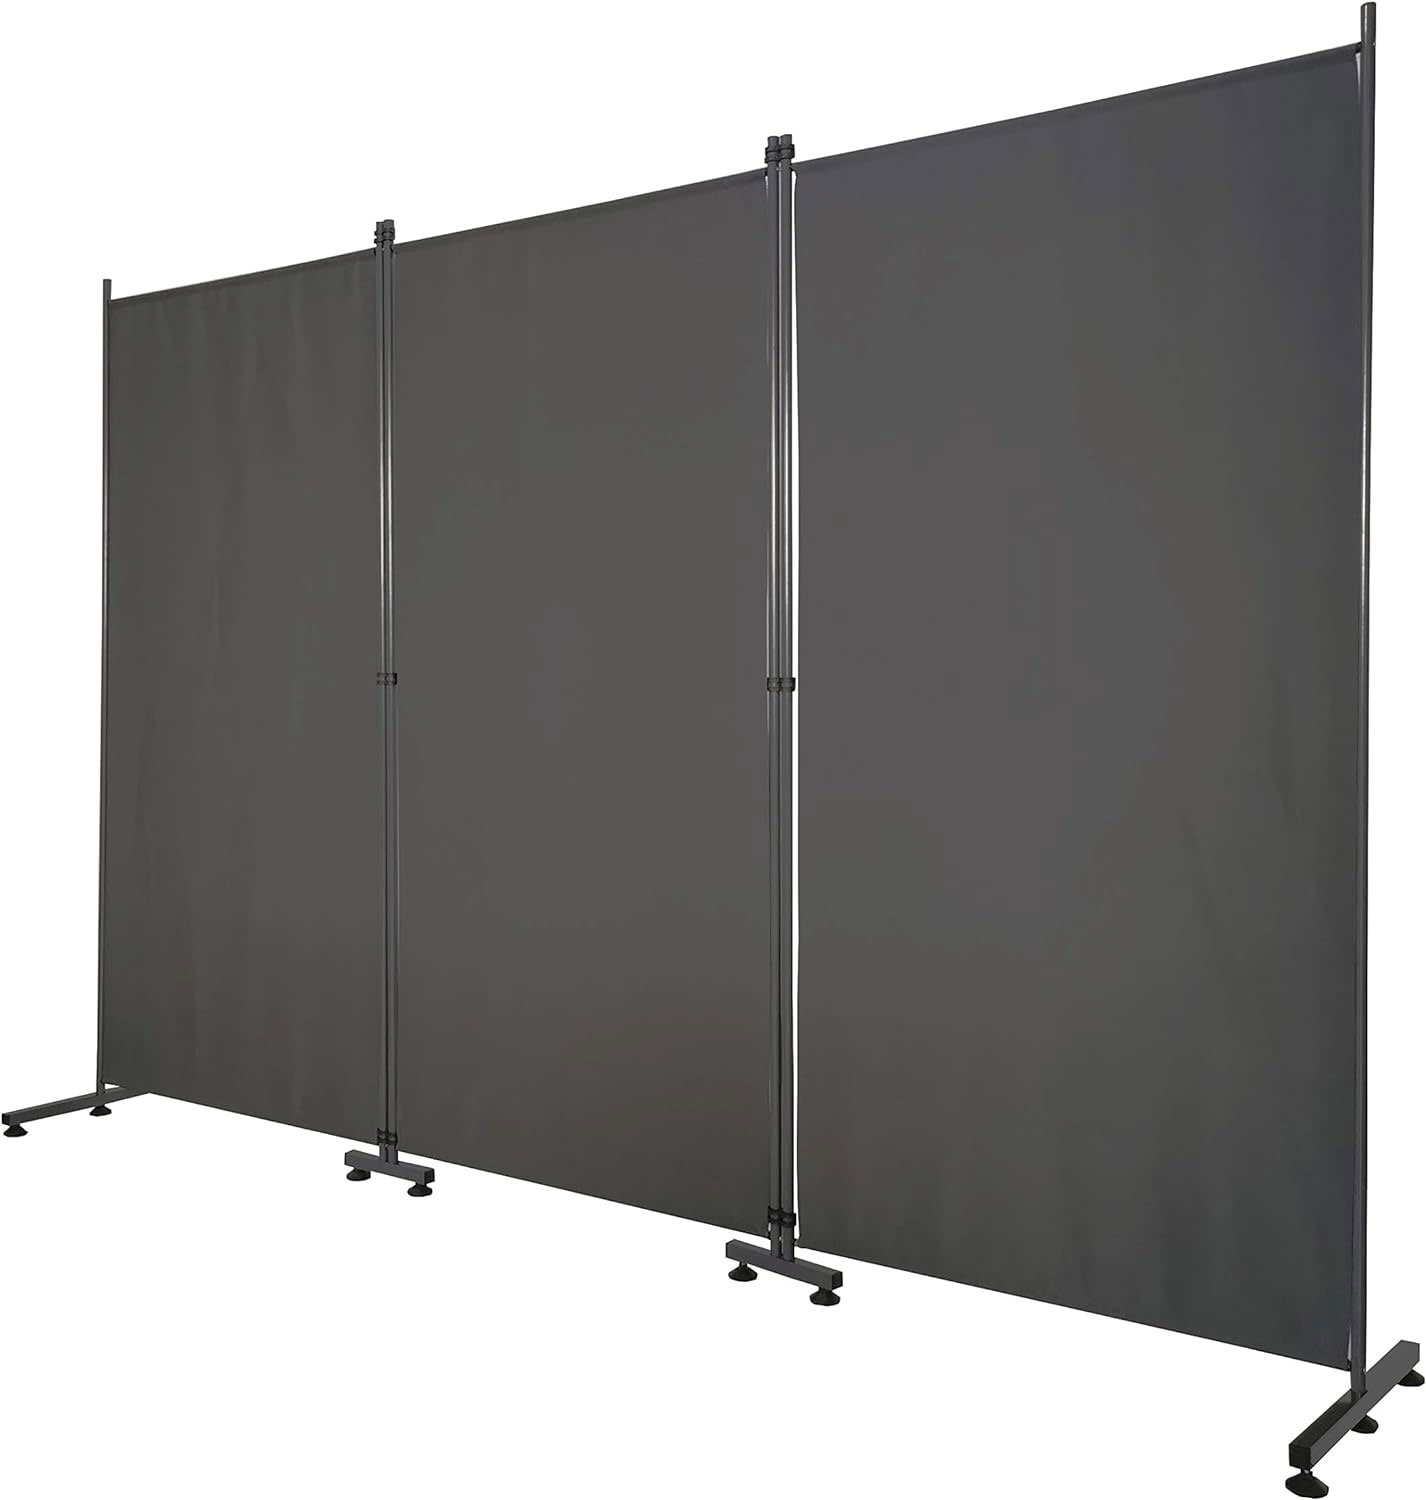 Versatile Room Divider for Accessibility